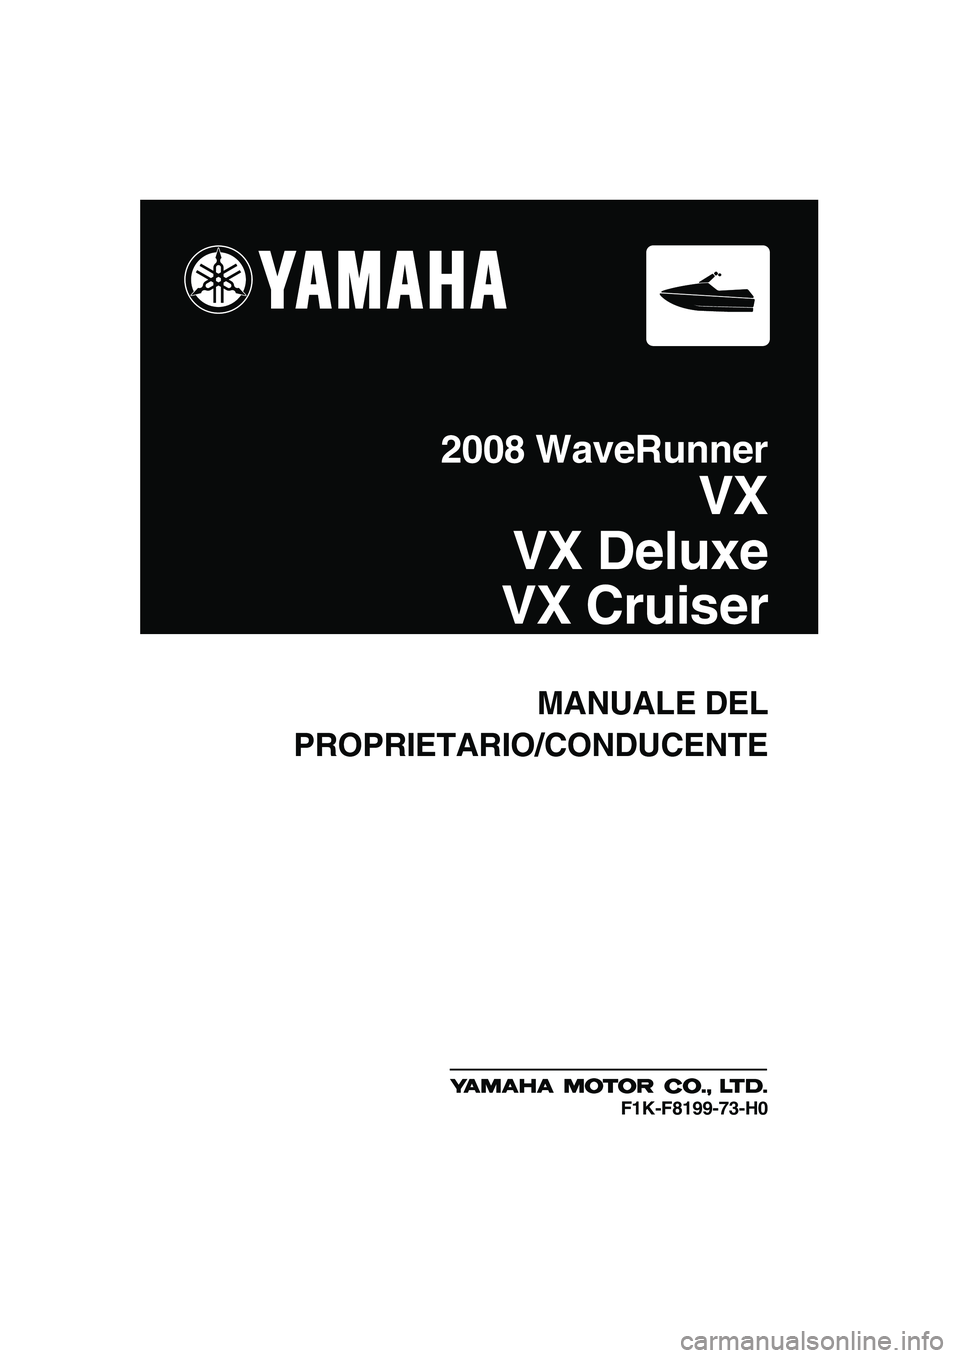 YAMAHA VX 2008  Manuale duso (in Italian) MANUALE DEL
PROPRIETARIO/CONDUCENTE
2008 WaveRunner
VX
VX Deluxe
VX Cruiser
F1K-F8199-73-H0
UF1K73H0.book  Page 1  Tuesday, July 10, 2007  9:24 PM 